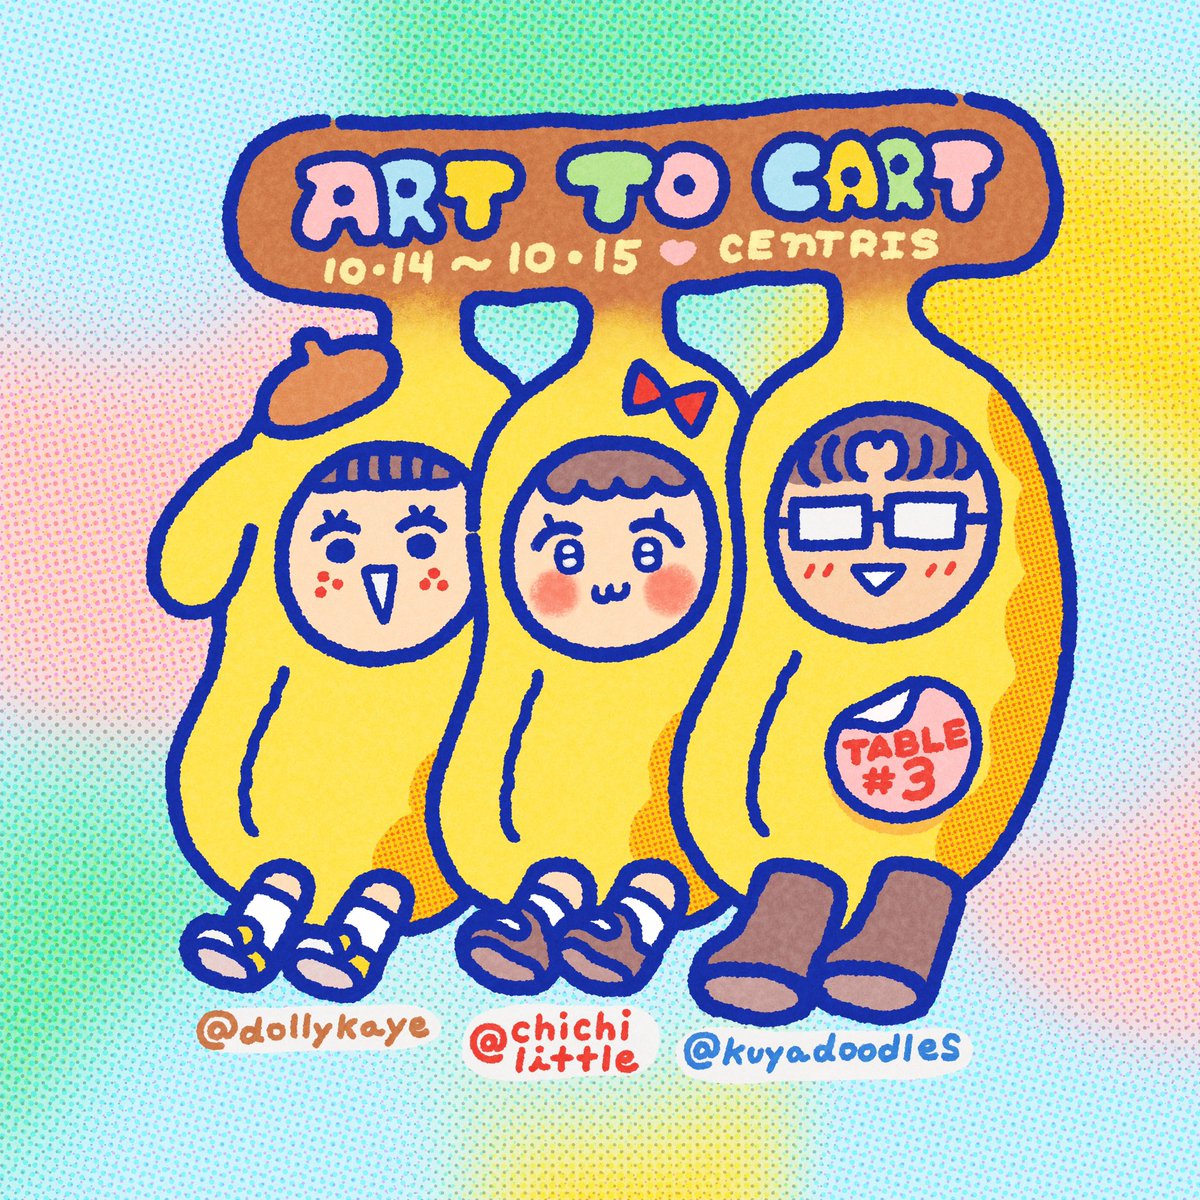 see you at @arttocartph this weekend in centris elements! 🧡🍌🛒 we will be at table # 3 from 10am to 7pm, saturday and sunday.

this will be our only art market event this october so i hope you can drop by! ^^ see u! #atc2023 #arttocart2023